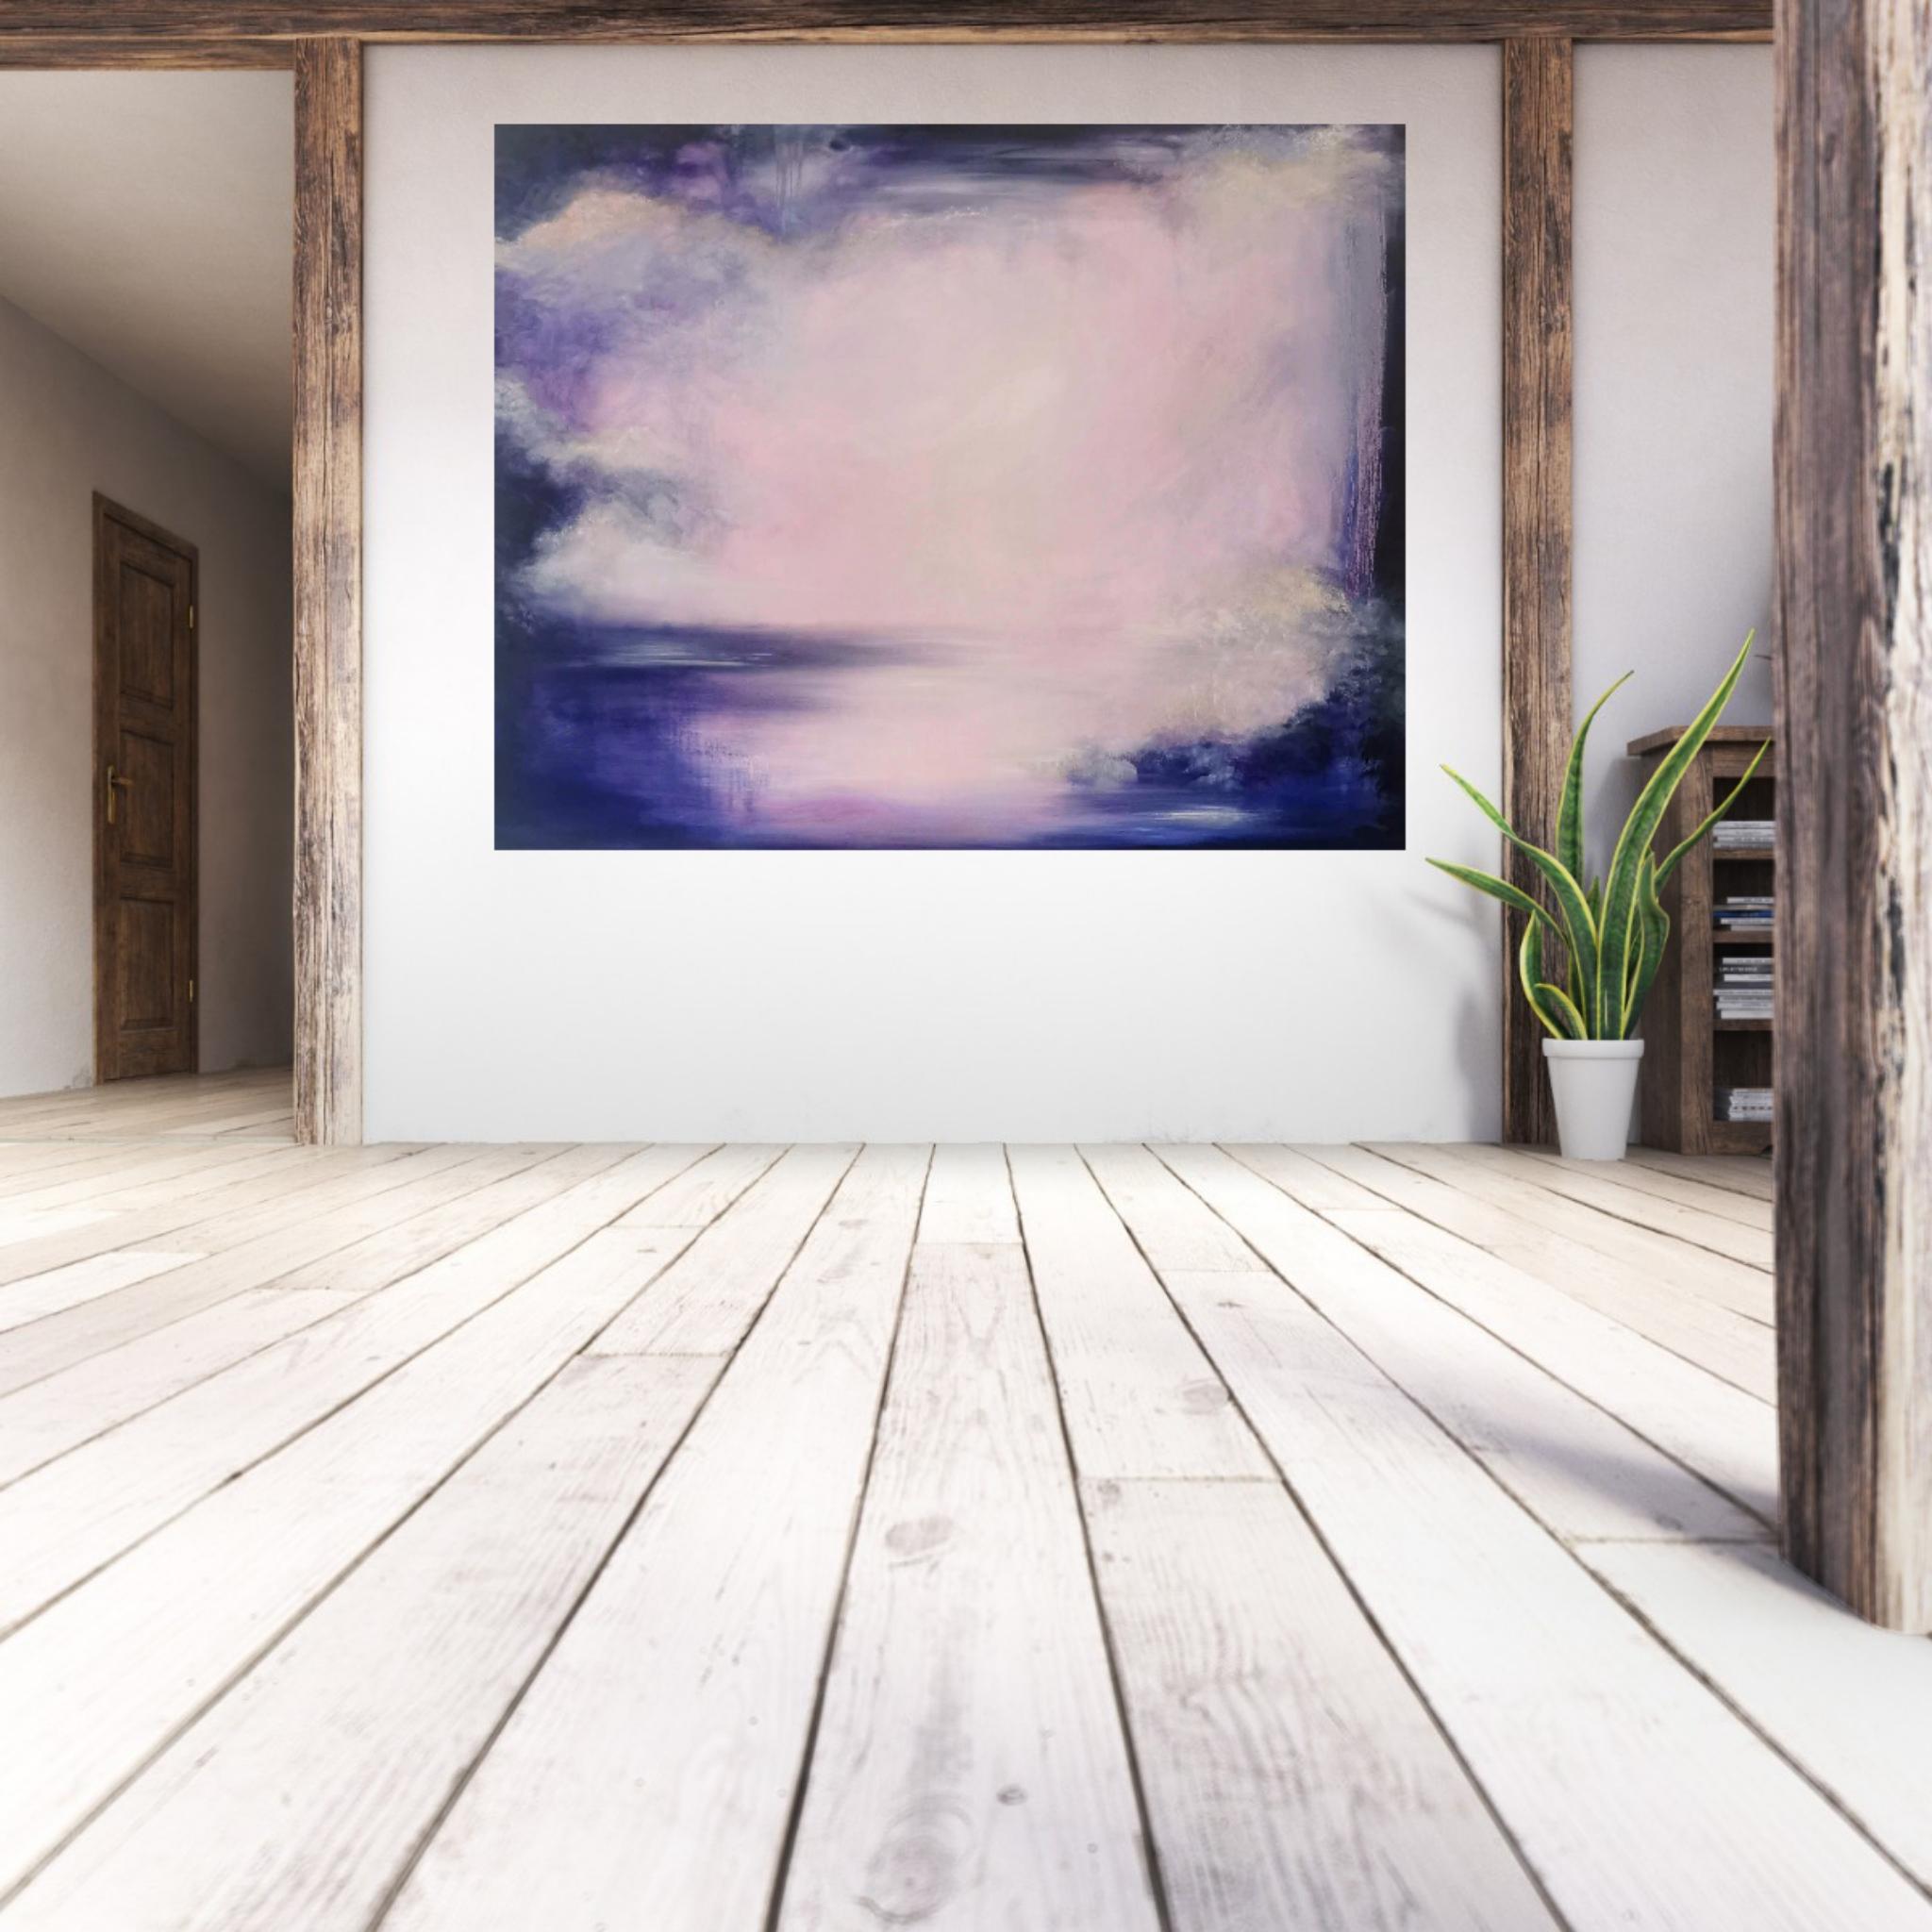 Violet night of the soul - Large violet abstract landscape painting 2